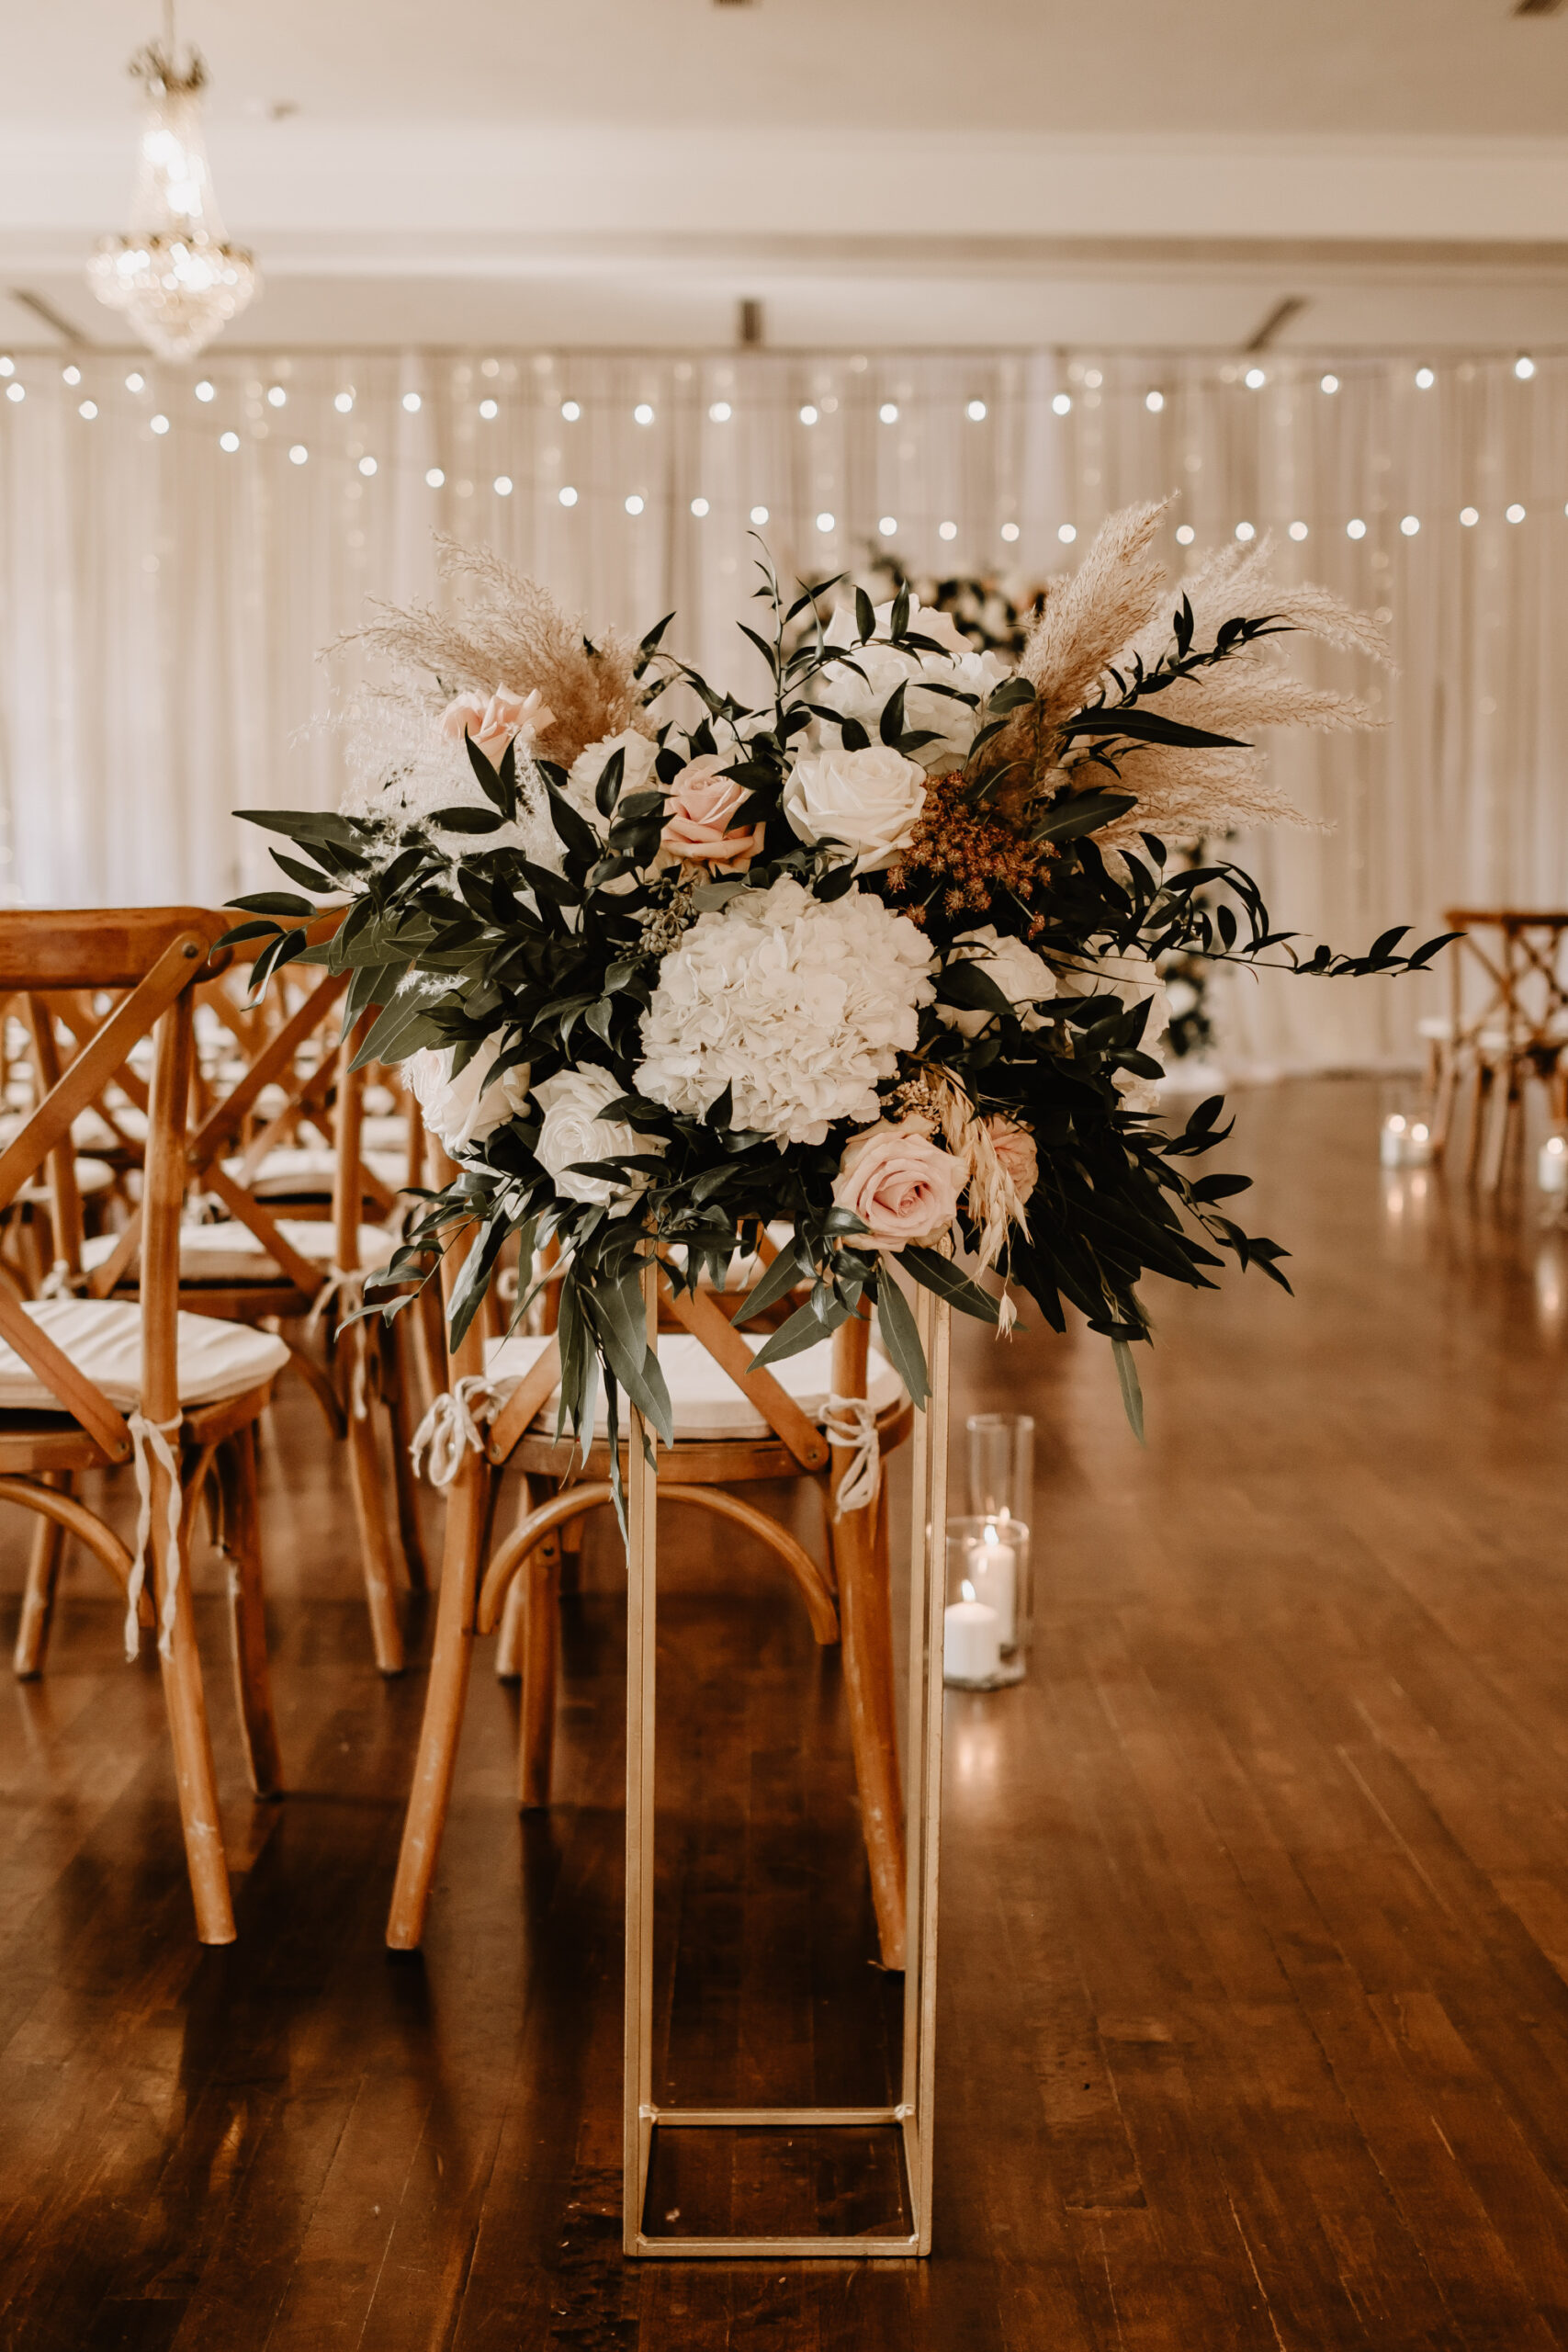 Neutral Boho Modern Wedding Ceremony Decor, Tall Gold Stand with Lush White Hydrangeas, Blush Pink Roses, Greenery, Pampas Grass Floral Arrangement | Tampa Bay Wedding Planner Taylored Affairs | Wedding Rentals Gabro Event Services